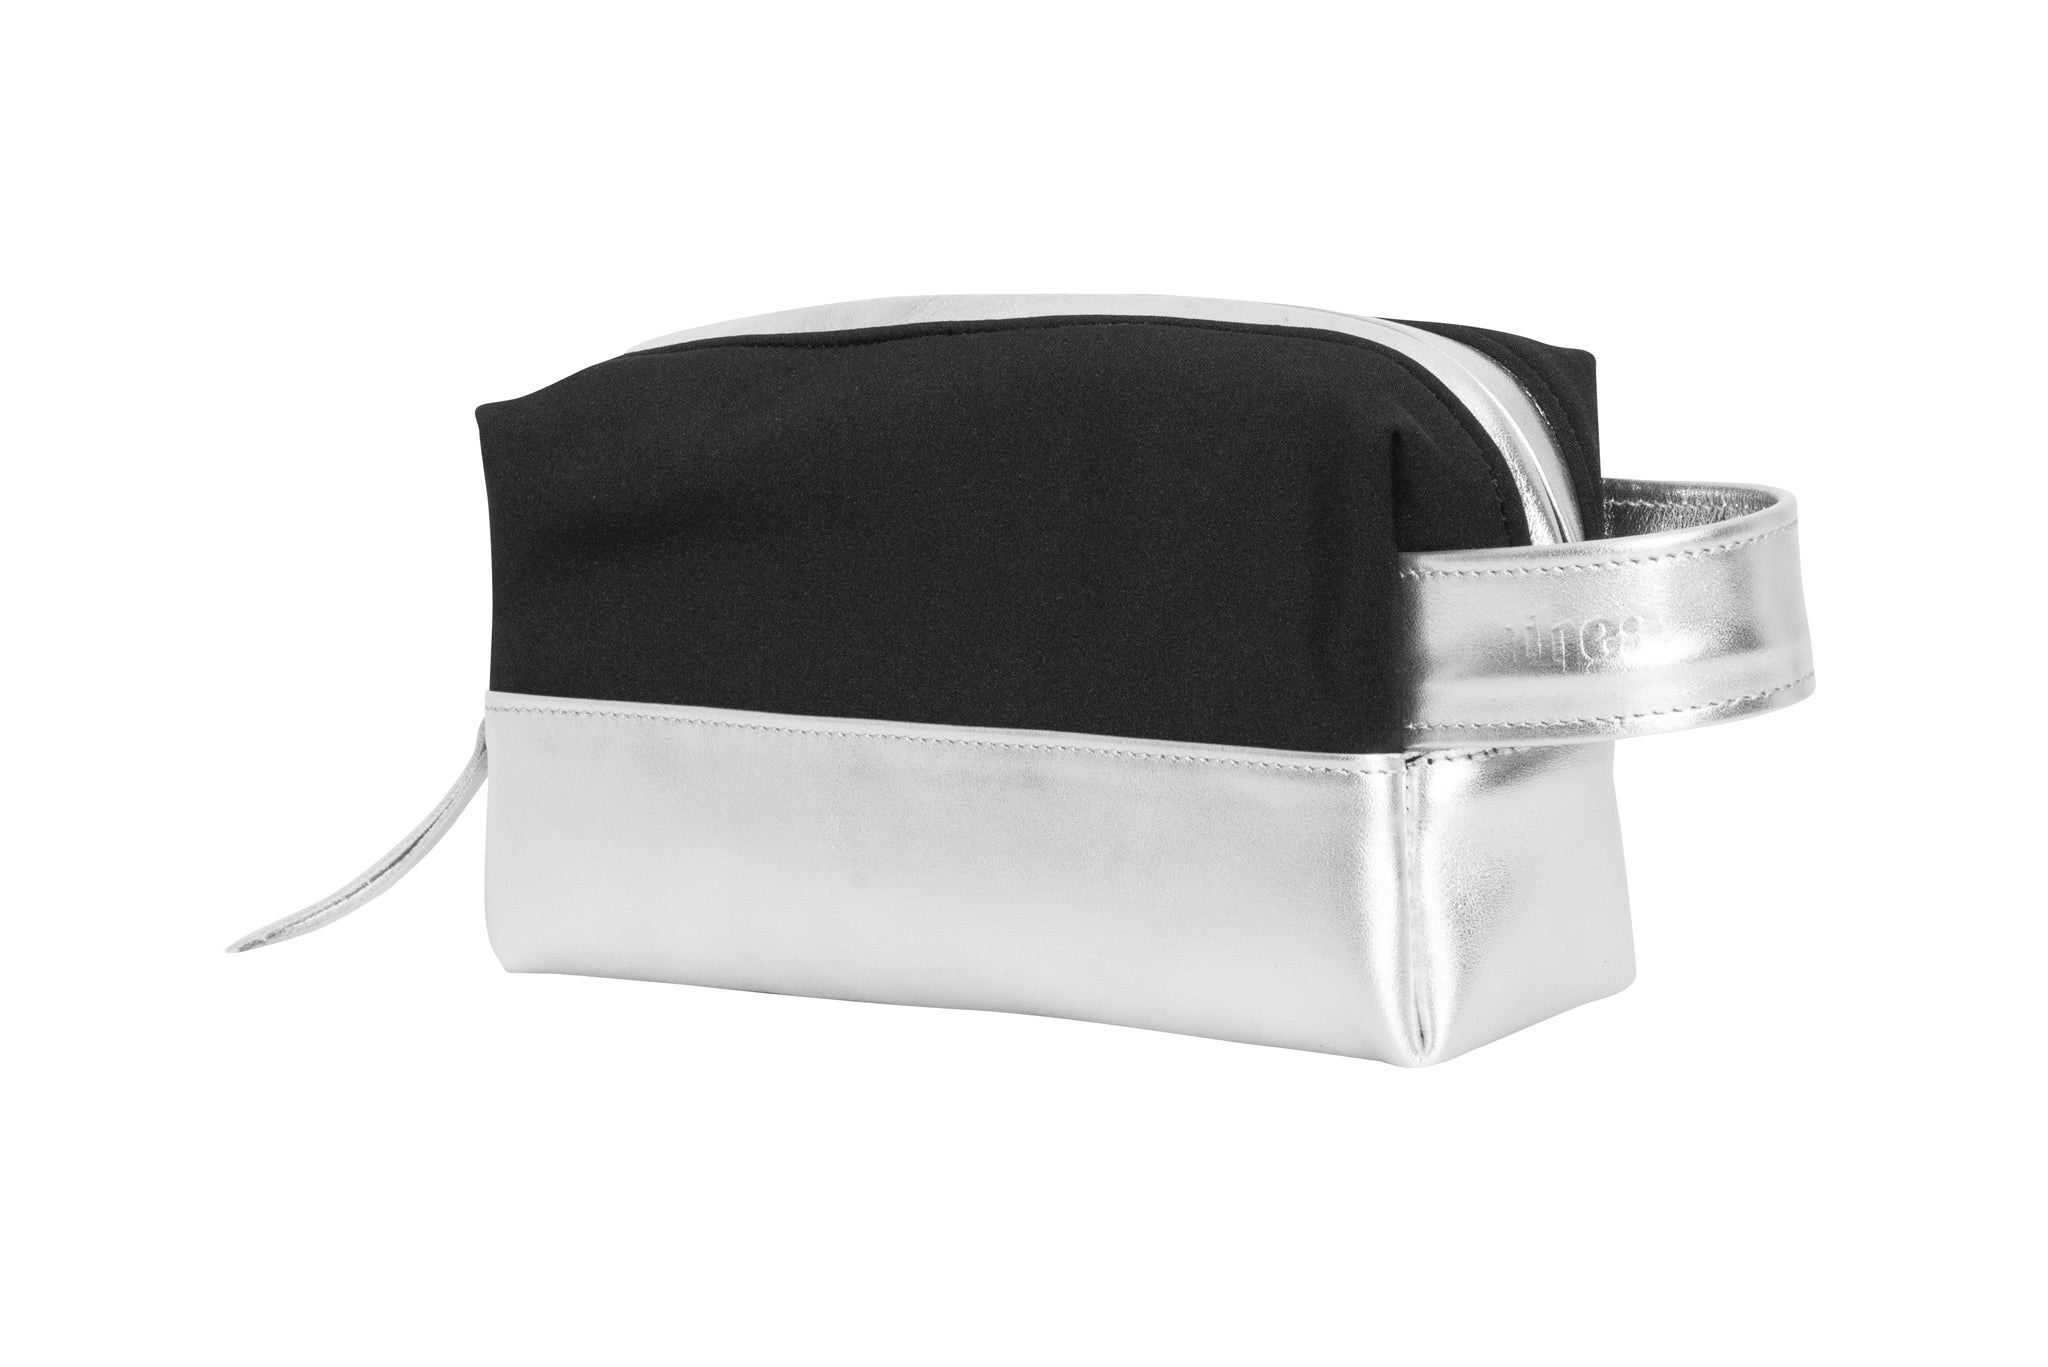 SCENT Beauty Case Small-Black-Silver - theabags